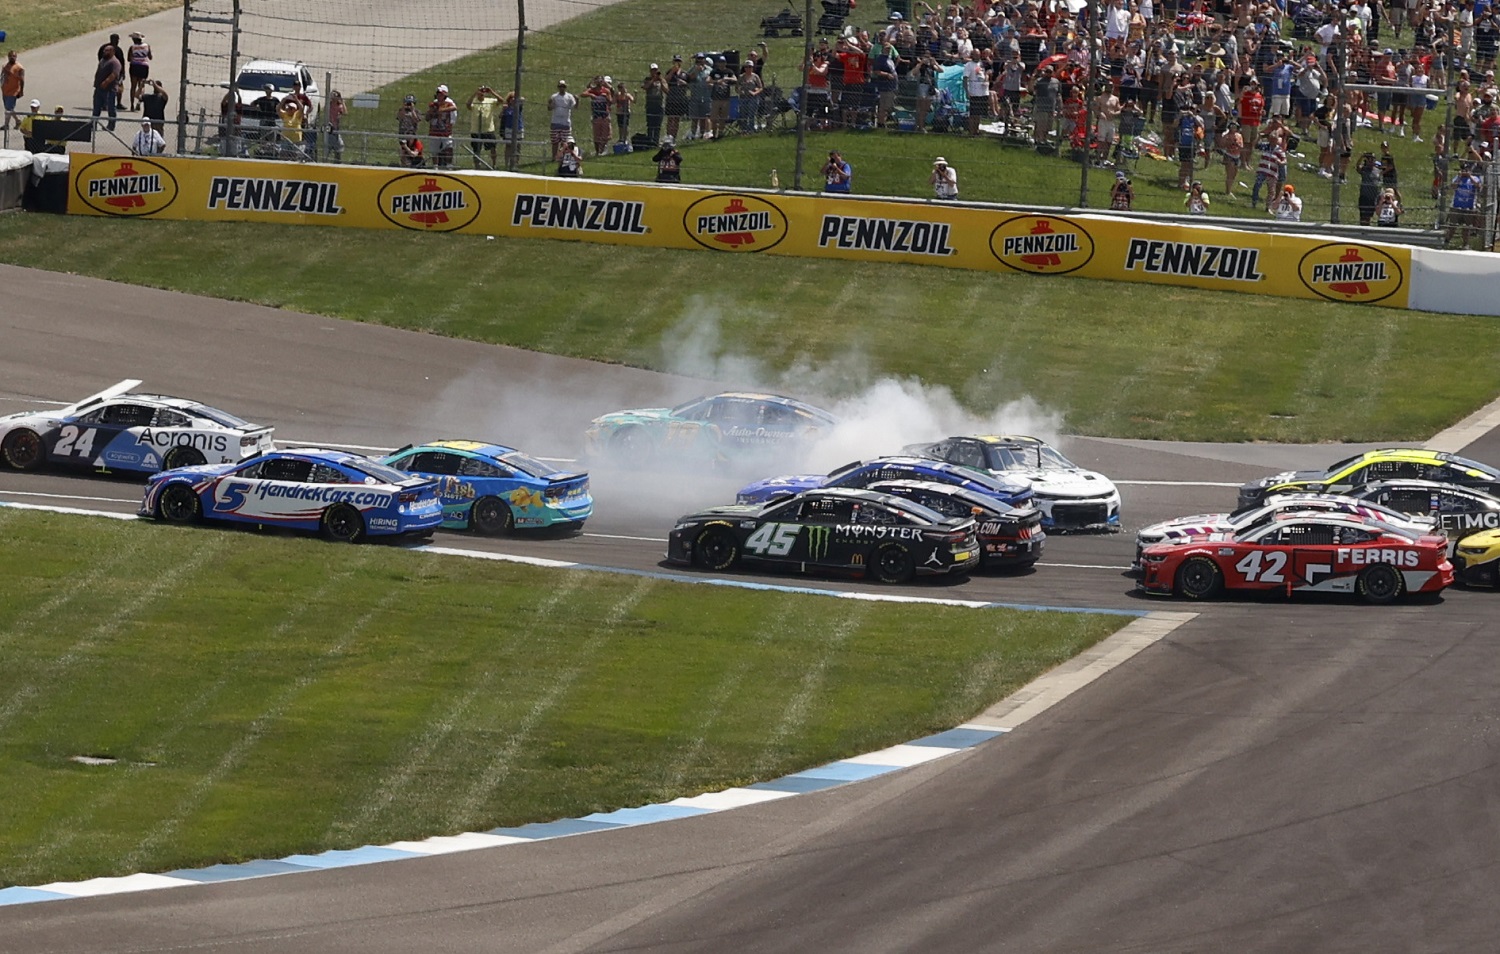 NASCAR Cup Series drivers Corey LaJoie (7) and Erik Jones (43) are involved in an incident going into Turn 1 on the first lap of the Verizon 200 at the Brickyard on July 31, 2022, at the Indianapolis Motor Speedway.